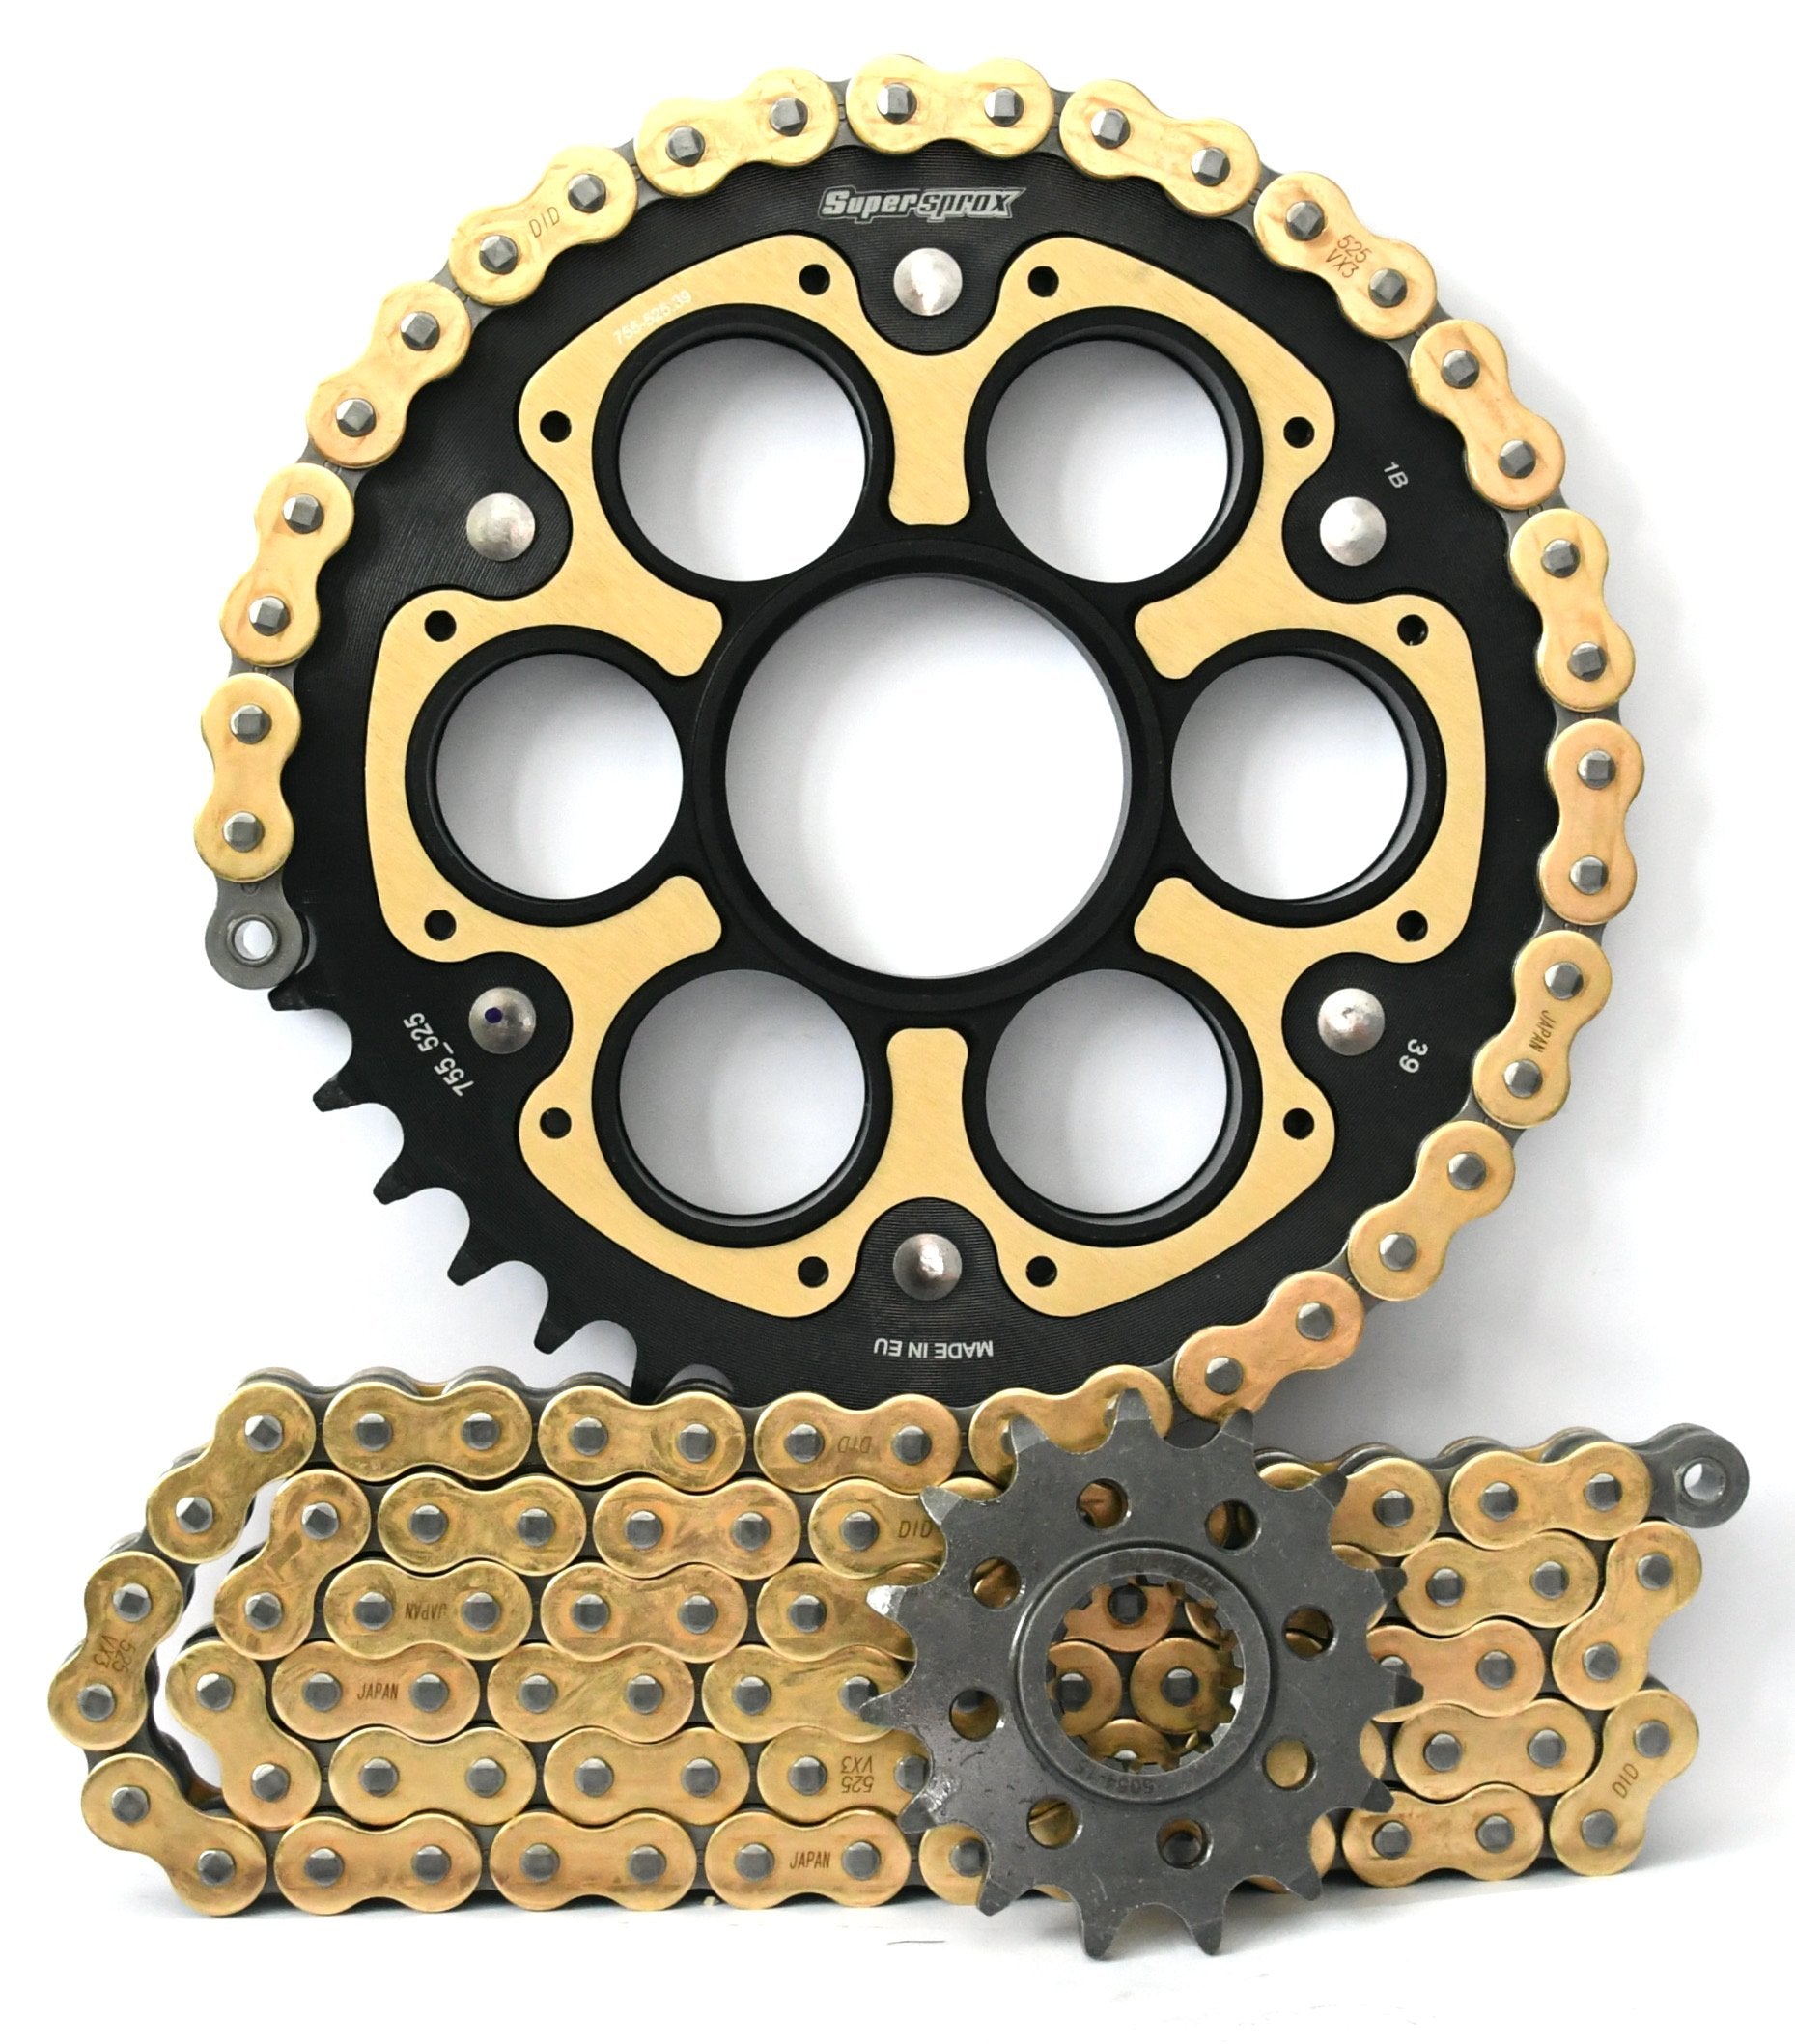 Supersprox Chain & Sprocket Kit for Ducati 1100 Streetfighter 2009-2011 - Standard Gearing - 0